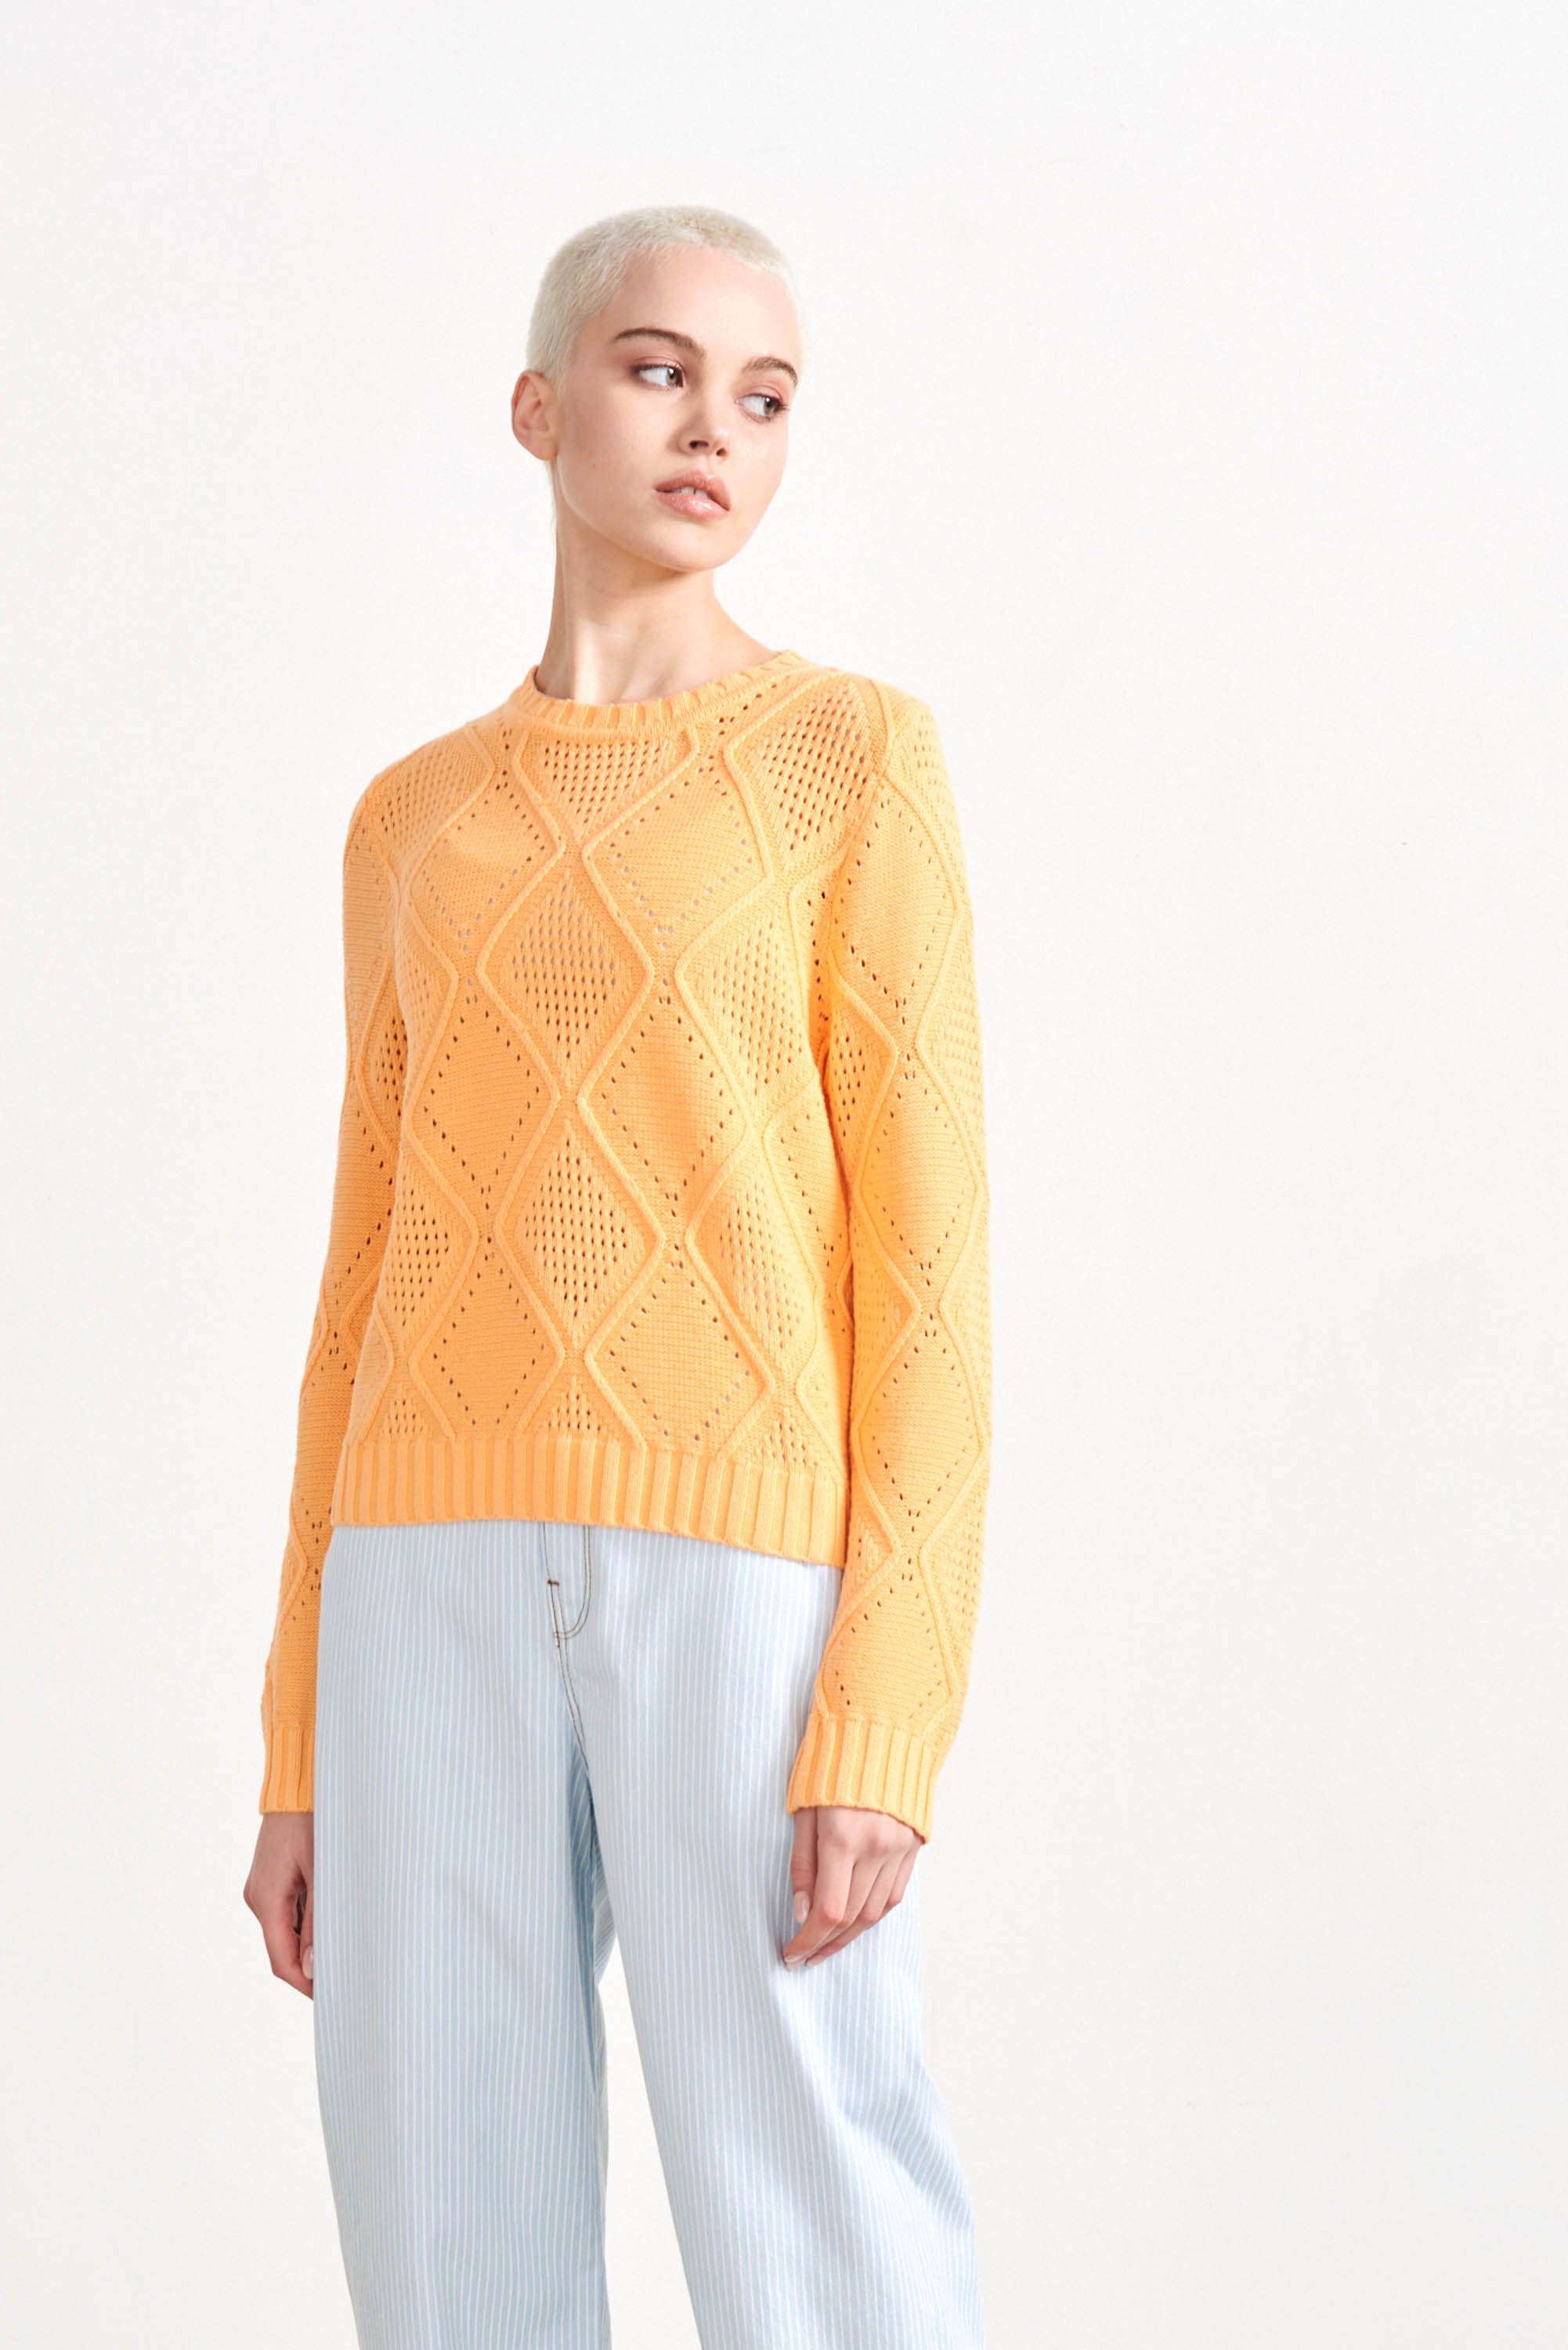 Blonde female model wearing Jumper1234 Apricot cotton crew neck jumper with a diamond texture stitch pattern